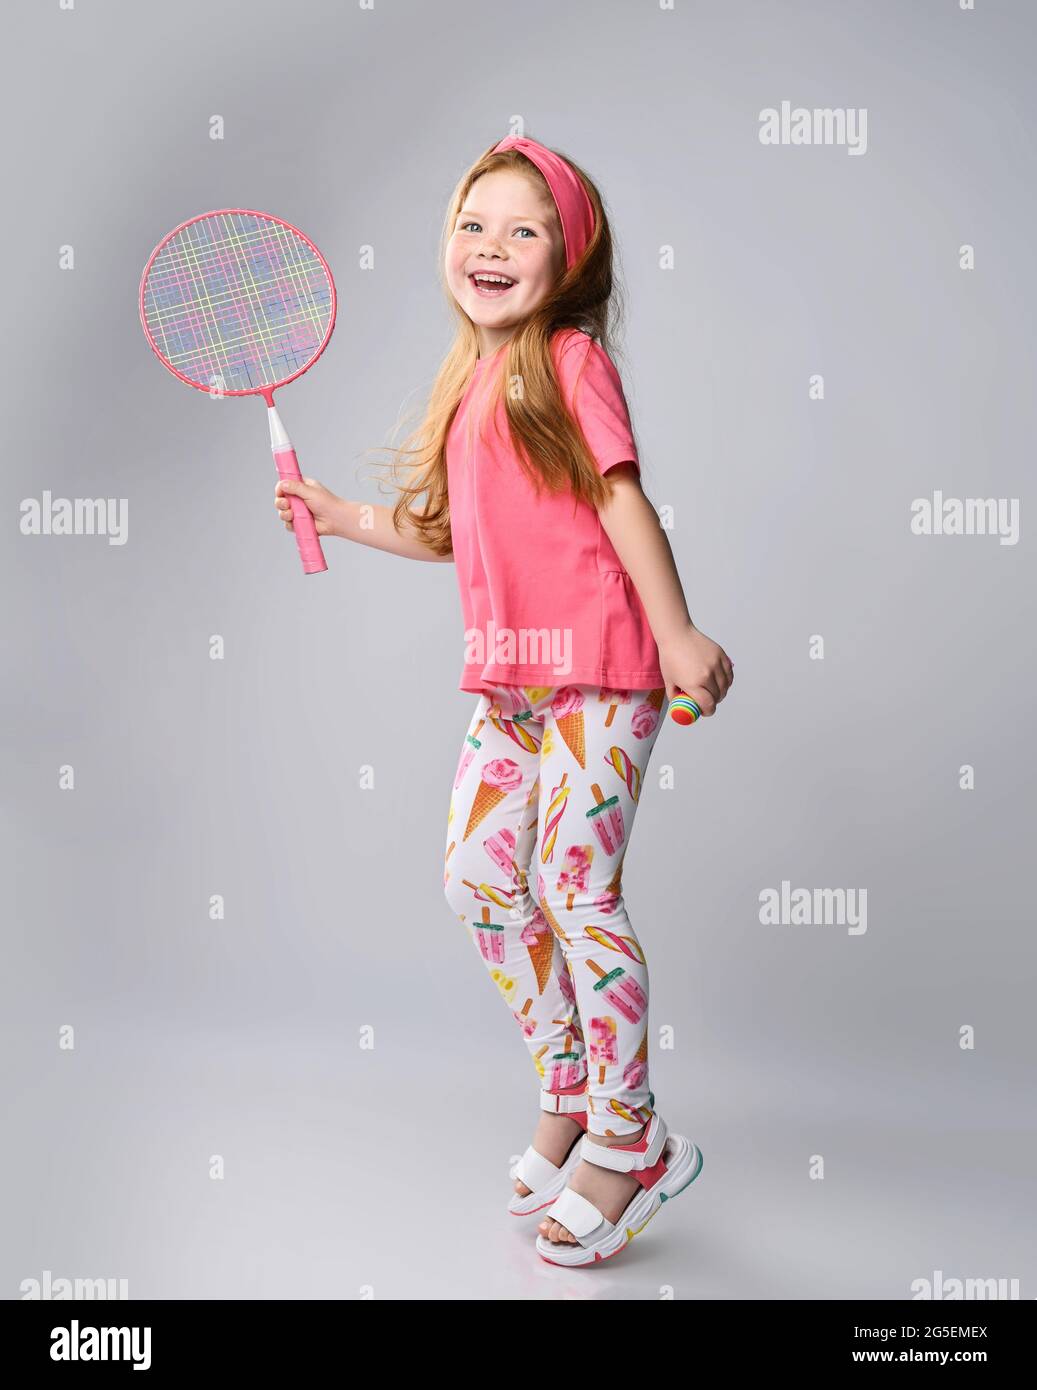 Active, laughing red-haired kid girl in pink t-shirt and headband jumps holding badminton racquet in hand, plays outdoor Stock Photo